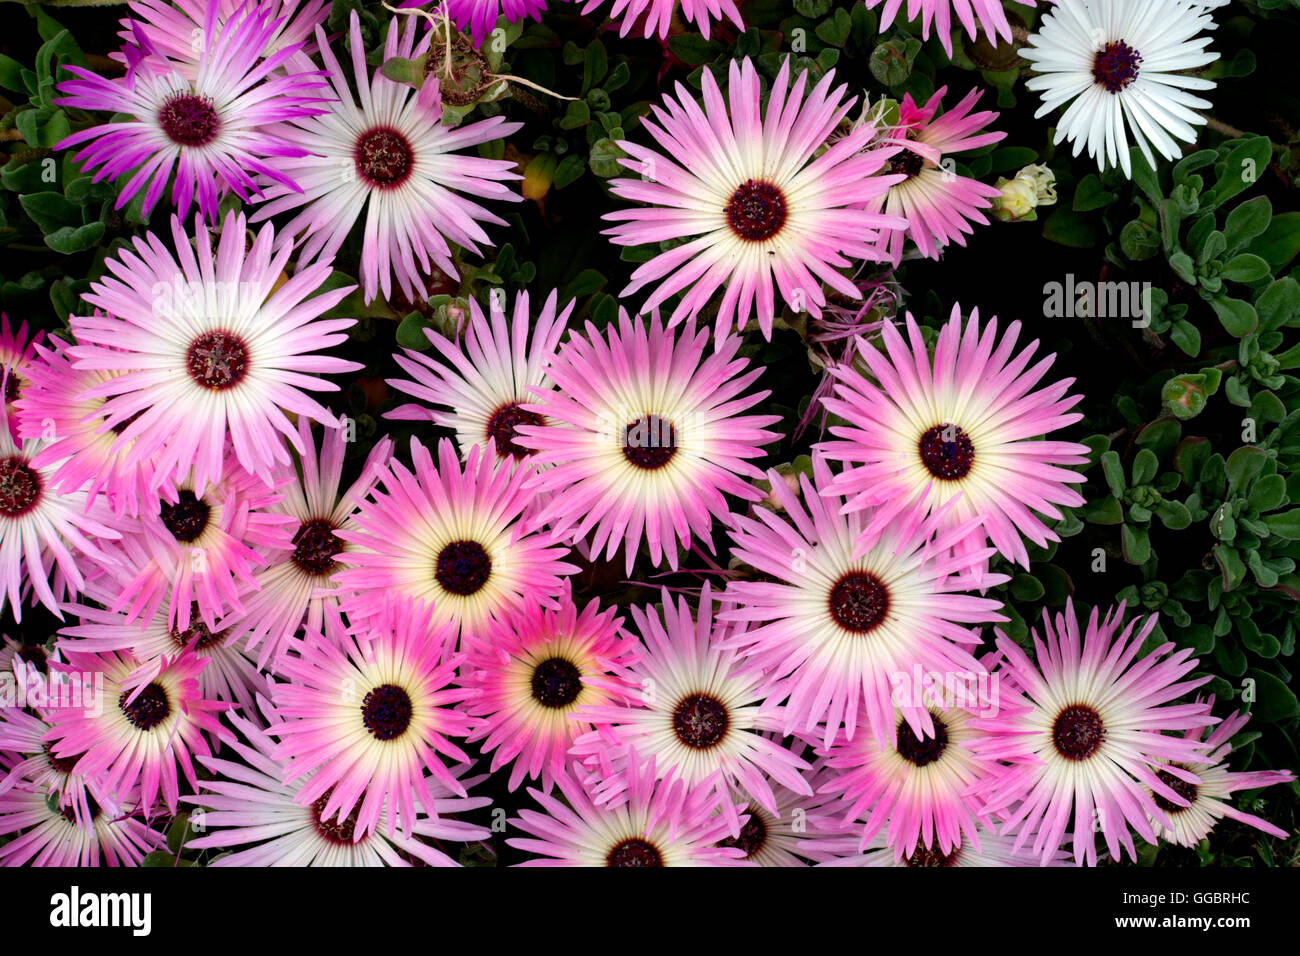 Mesembryanthemum flowers in a flower bed. Stock Photo